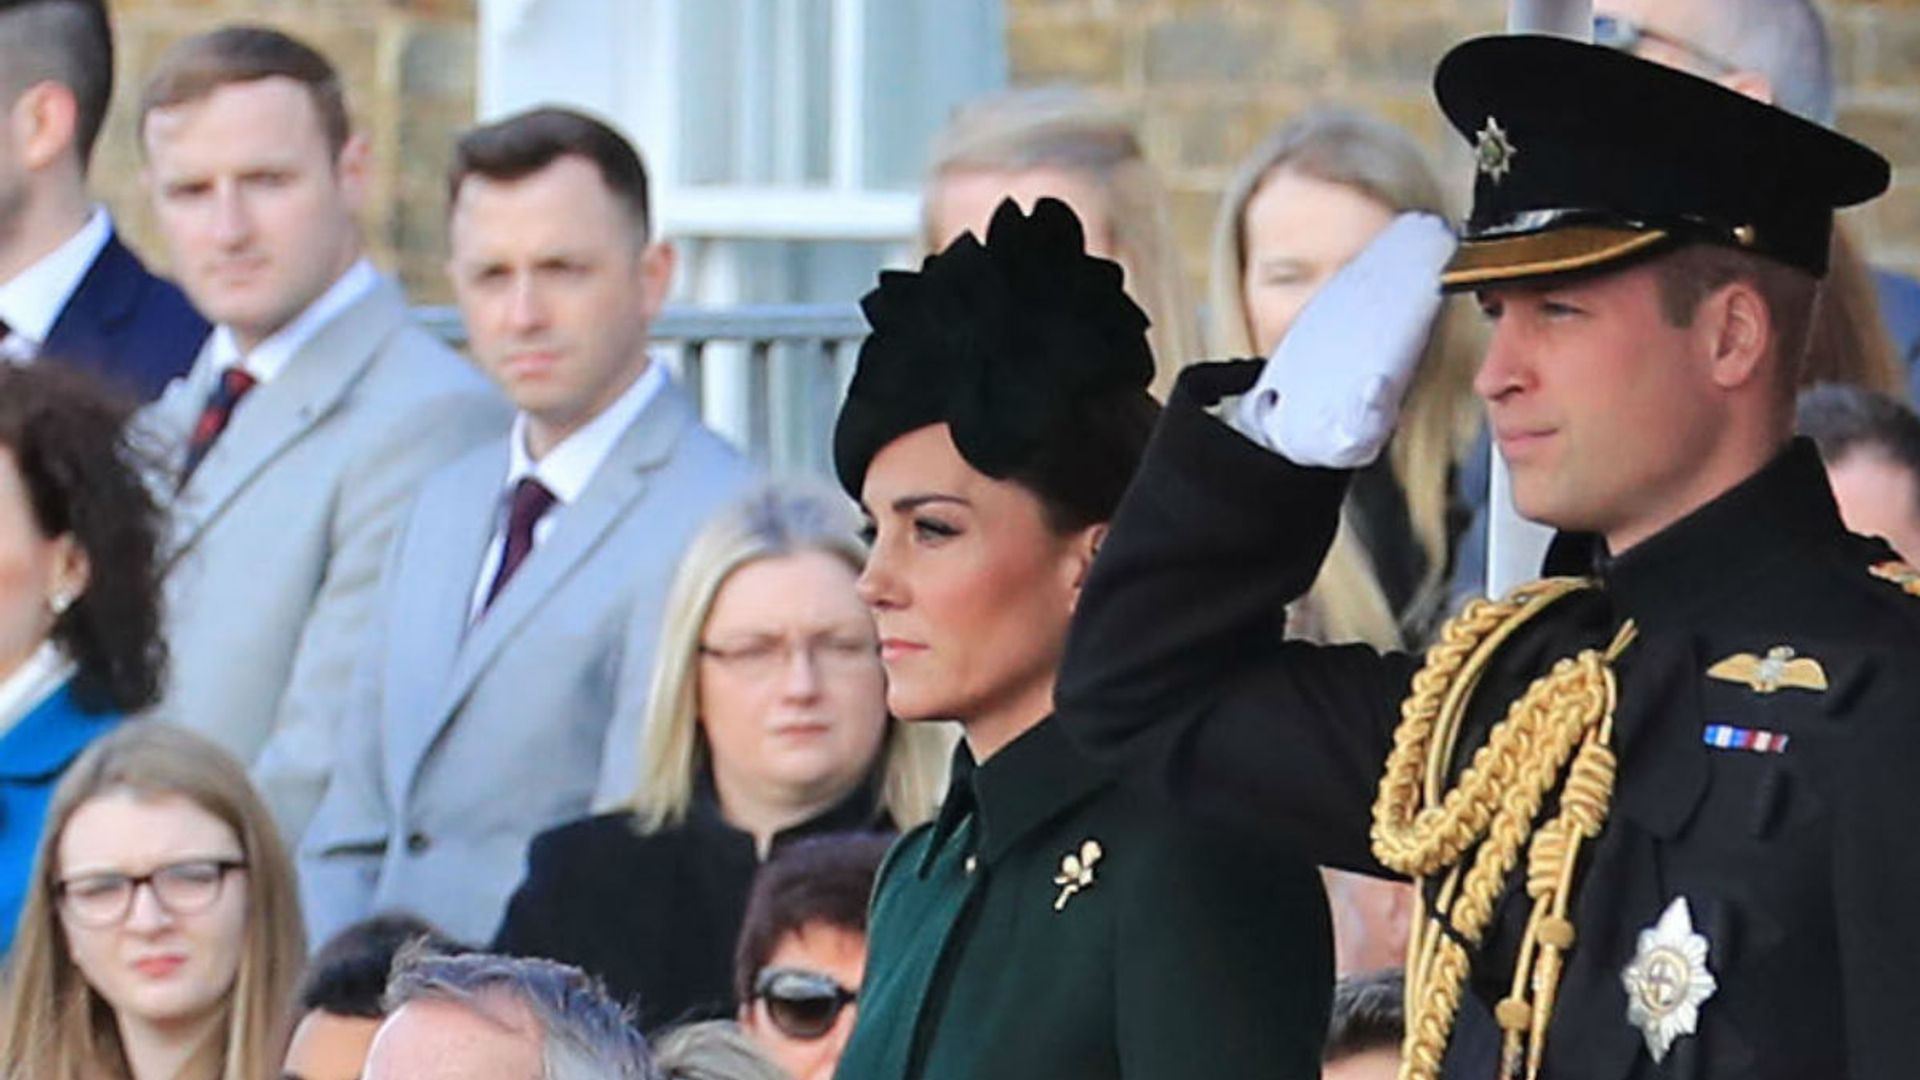 Prince William and Kate Middleton's St Patrick's Day outing – all the photos 